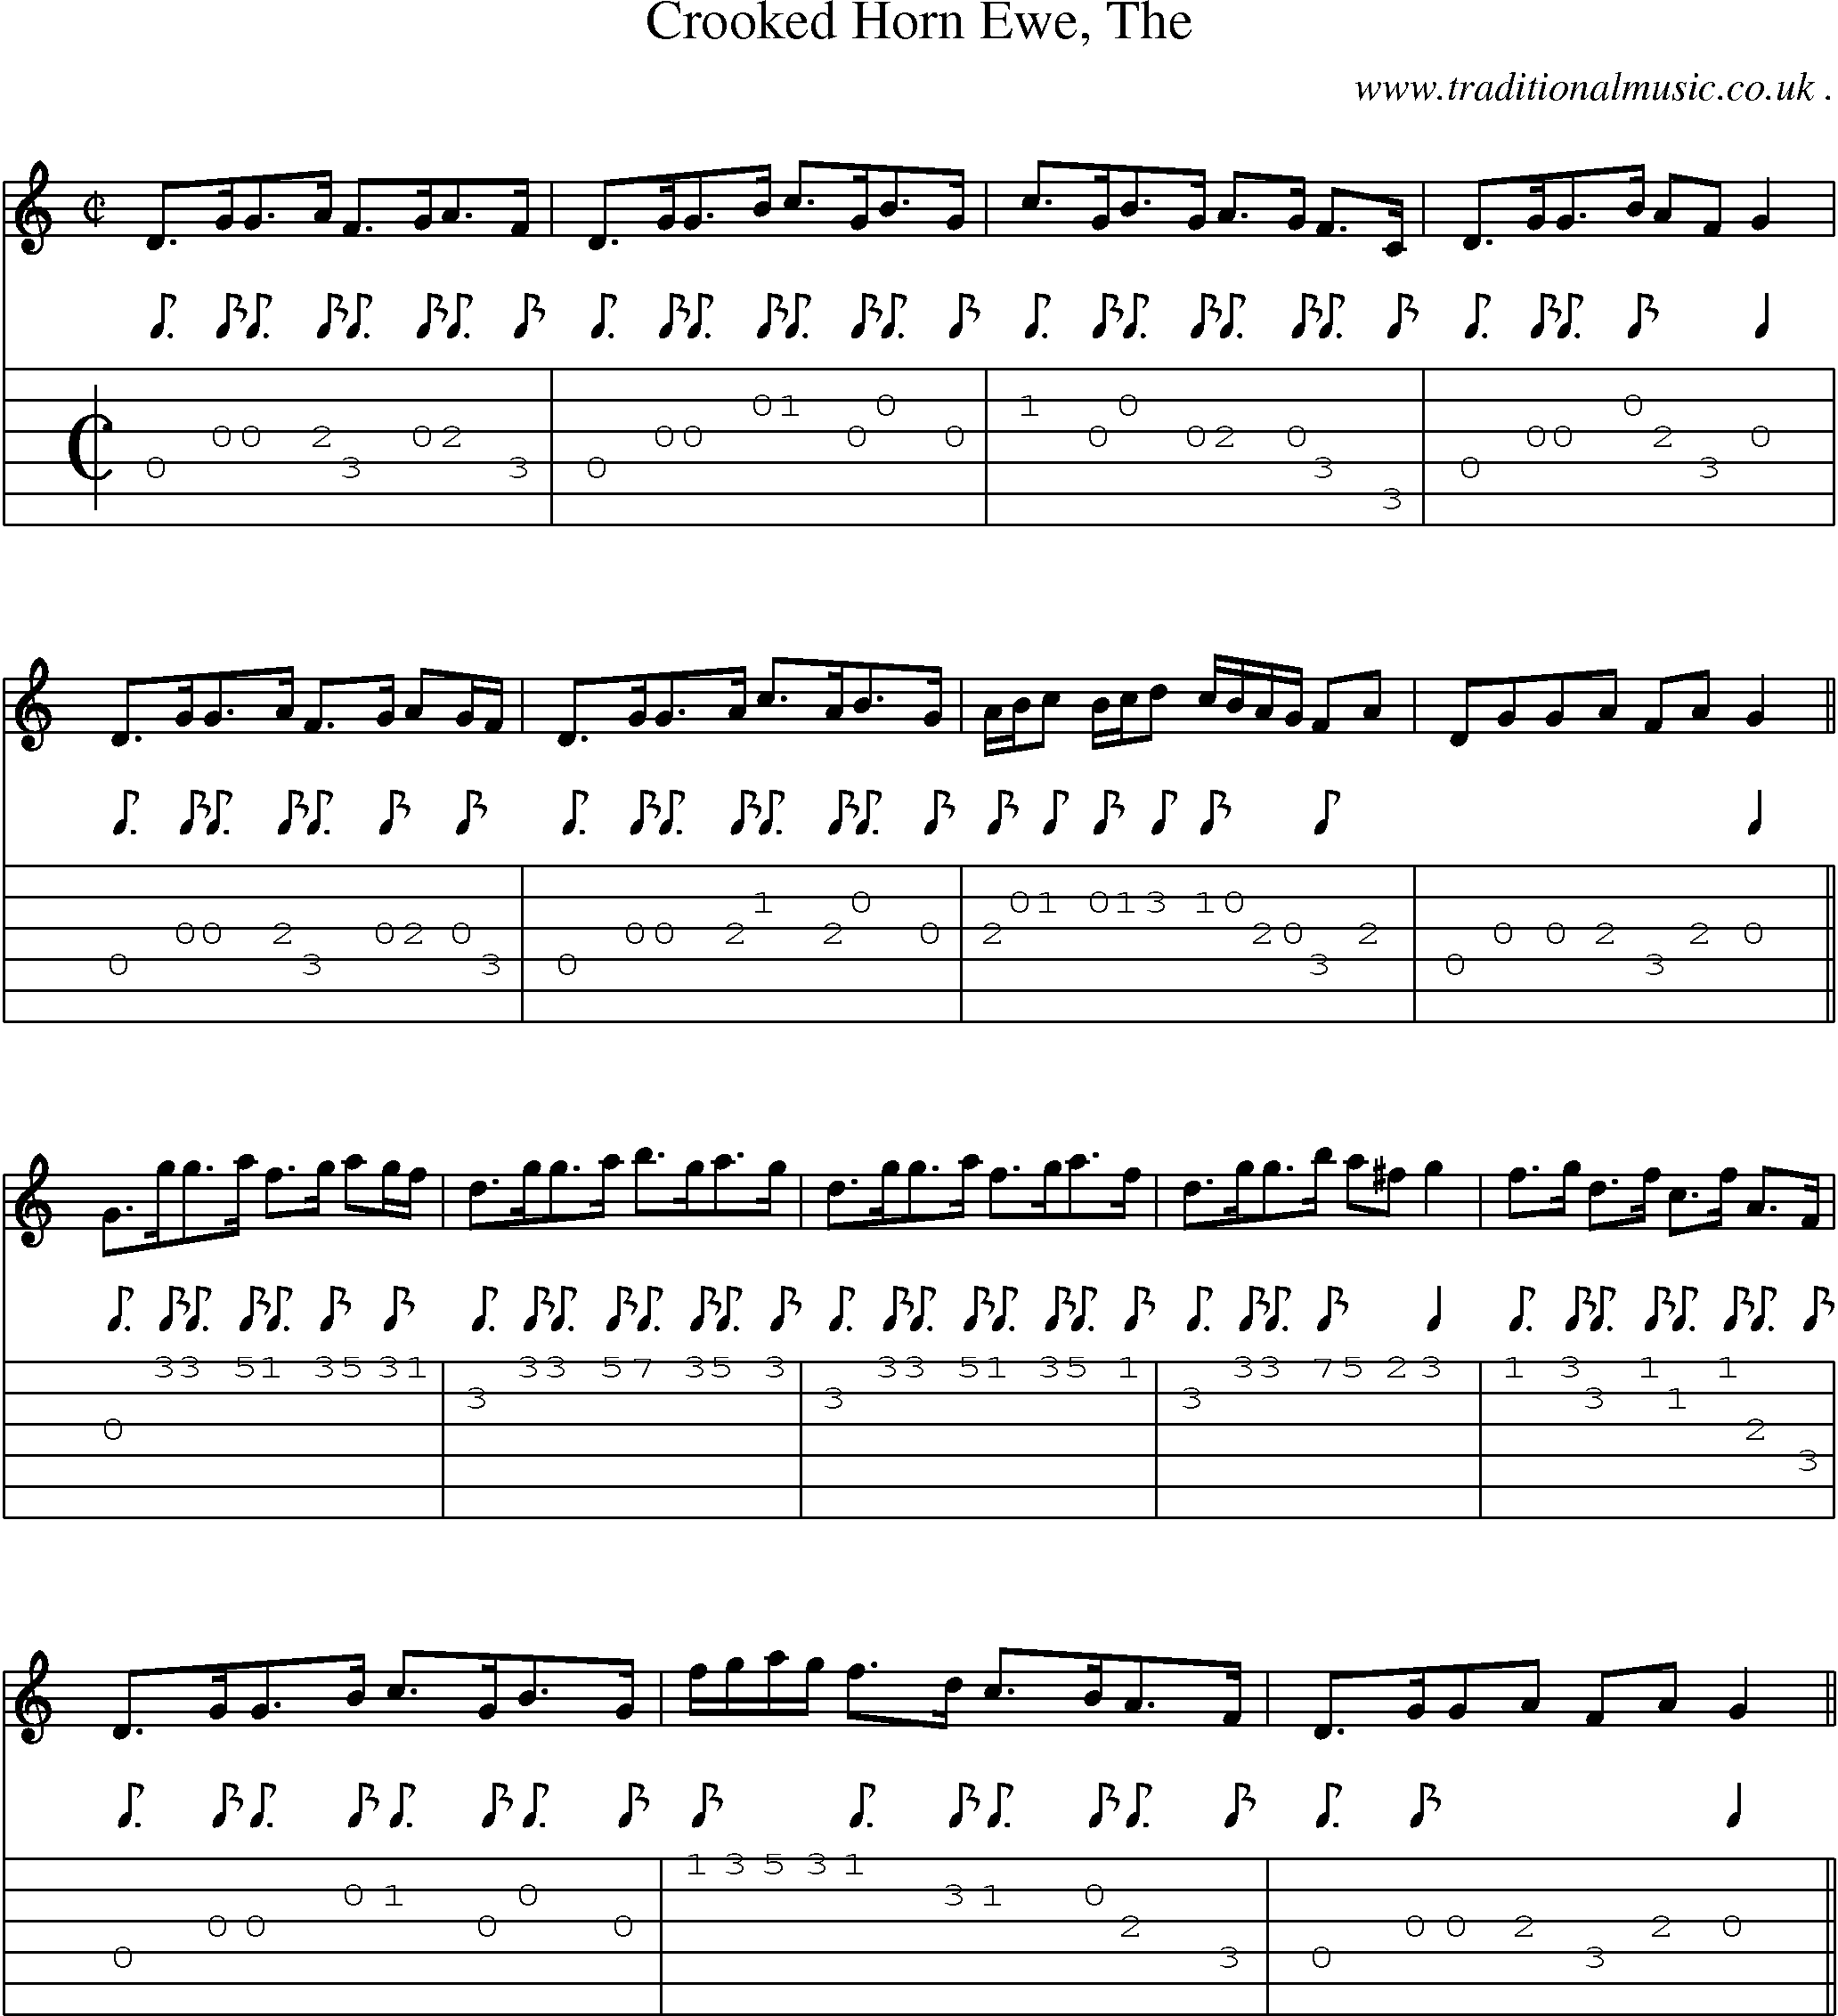 Sheet-music  score, Chords and Guitar Tabs for Crooked Horn Ewe The